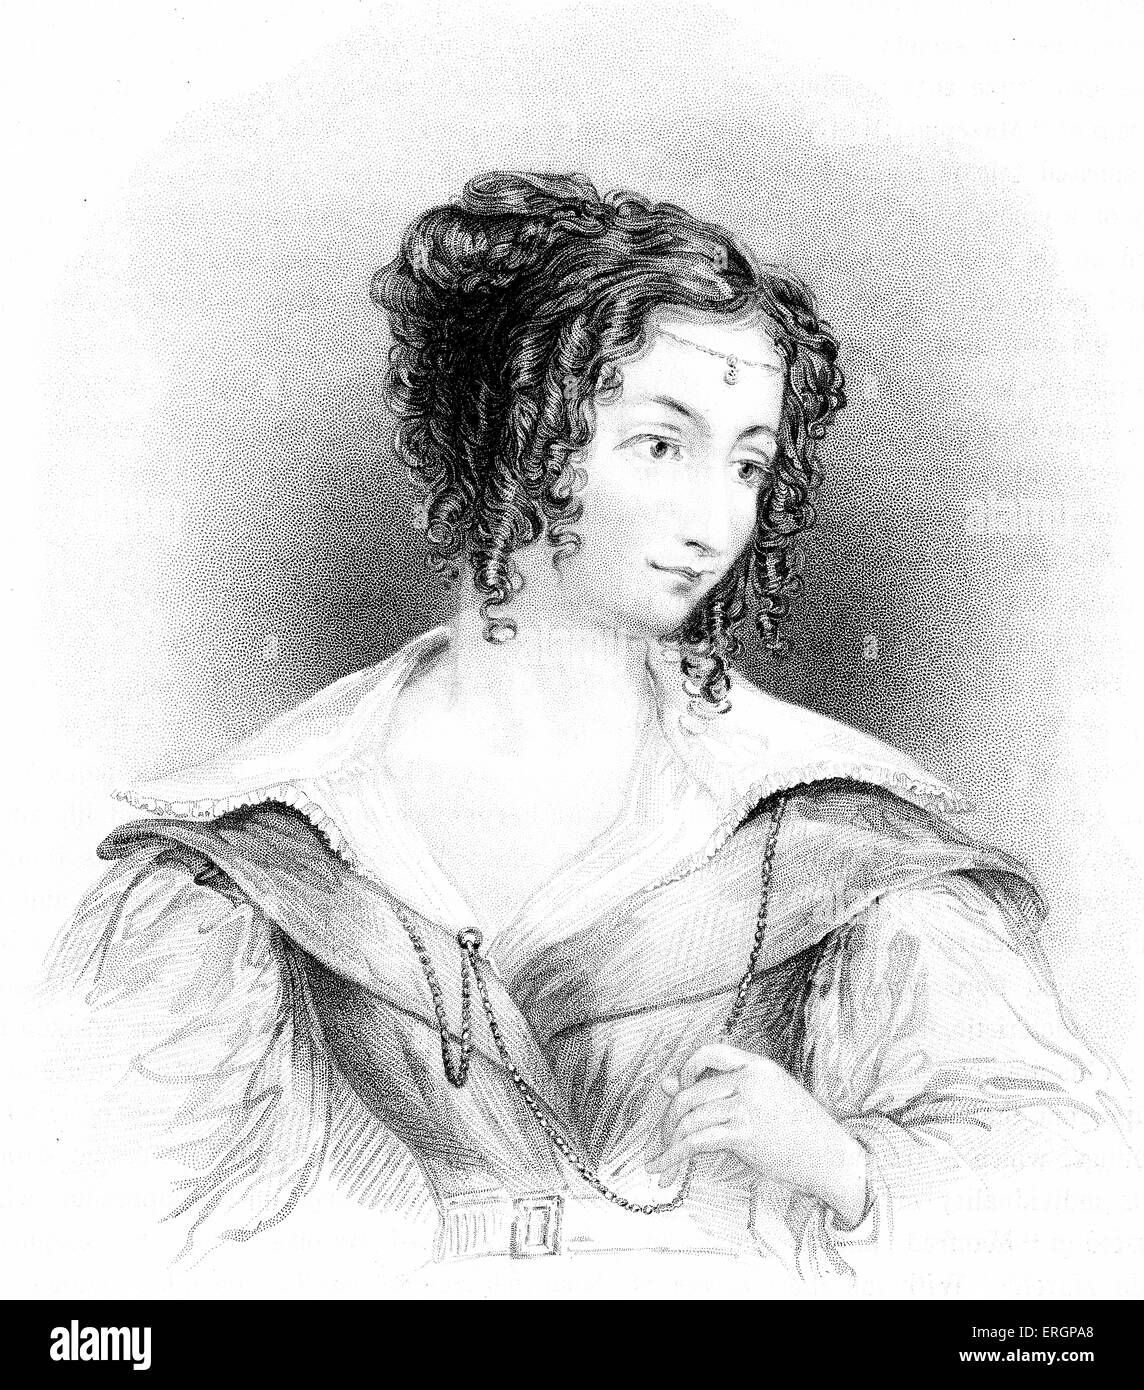 Countess Teresa Guiccioli. Mistress of Lord Byron while he was living in Ravenna. Portrait engraved by Henry Thomas Ryall after Stock Photo